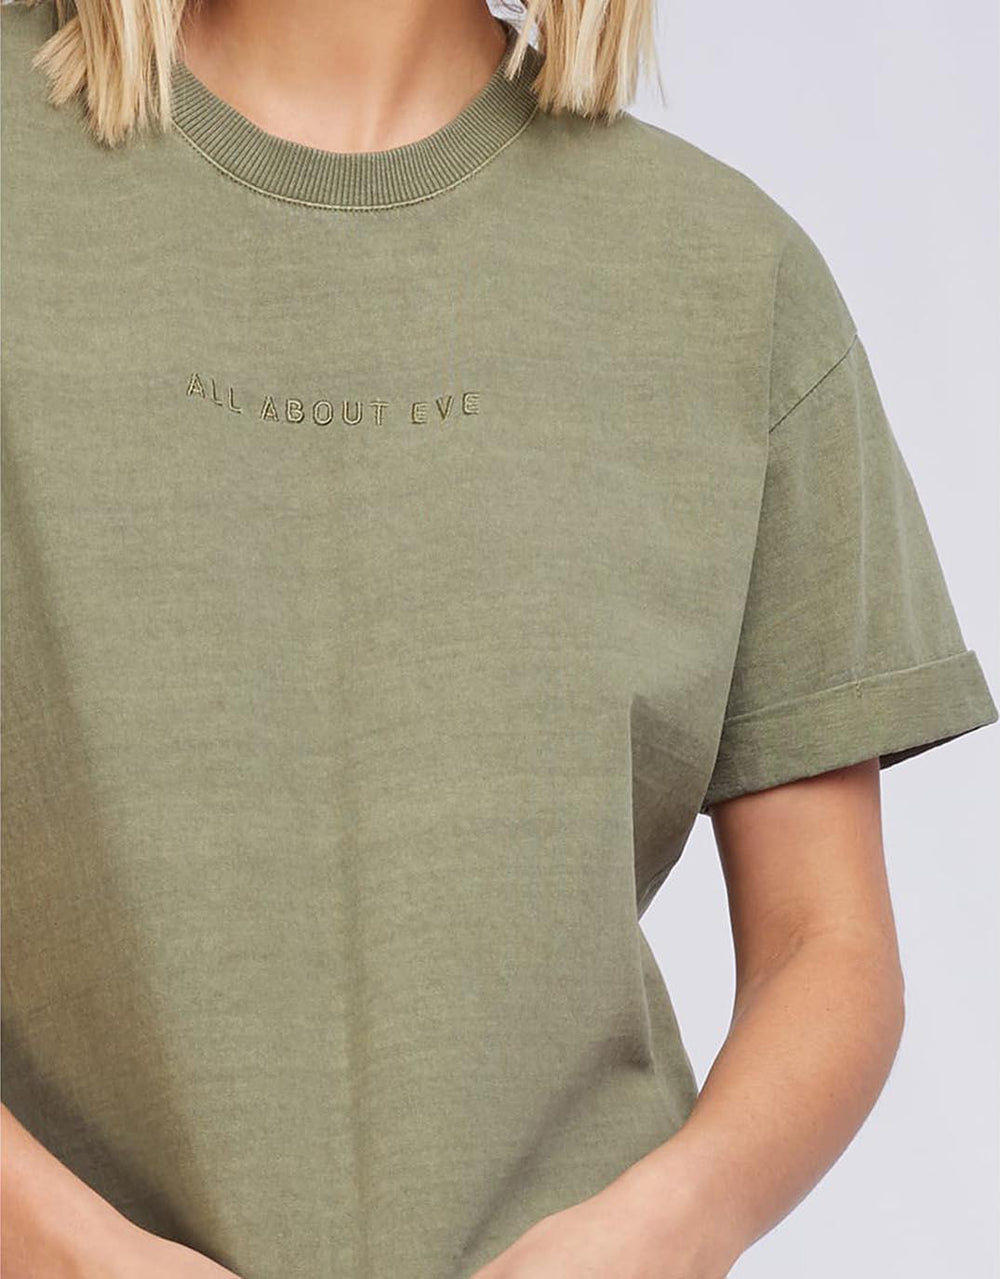 all-about-eve-aae-washed-tee-khaki-womens-clothing